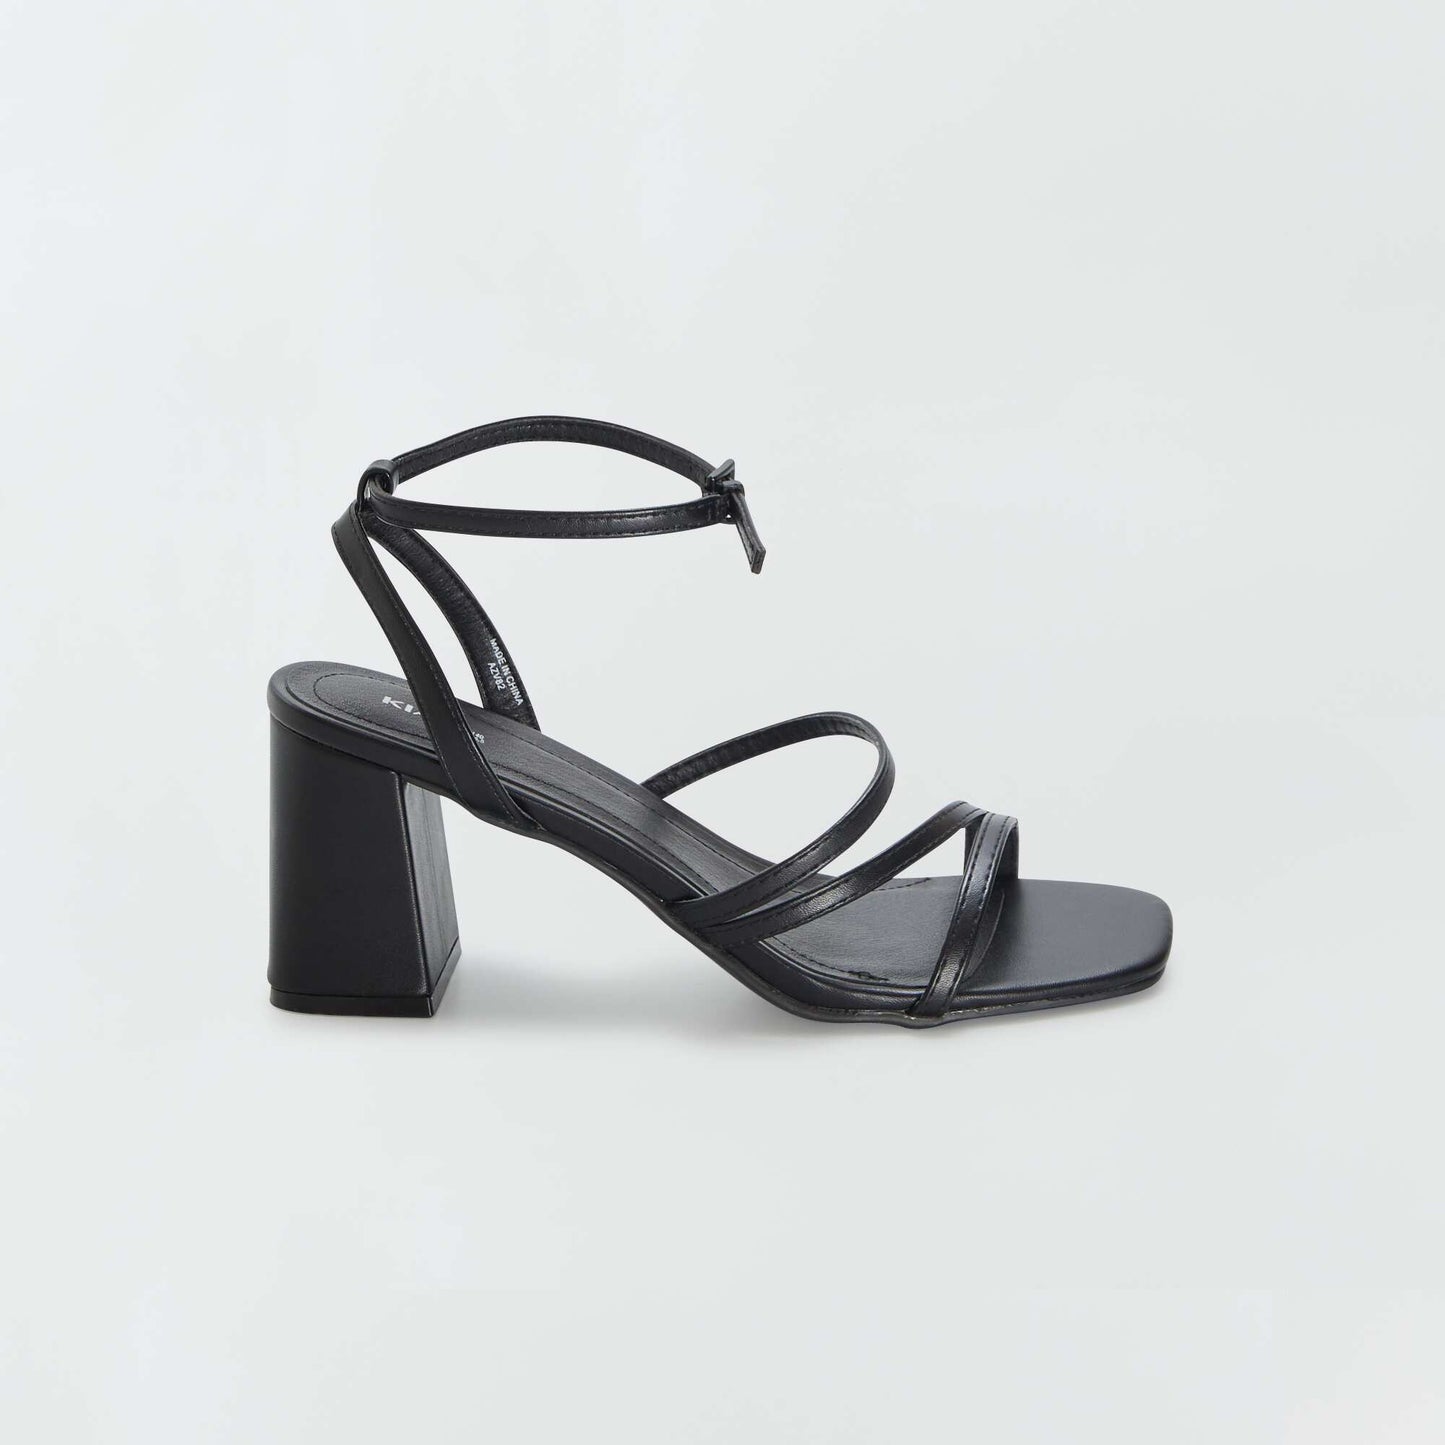 Square-heeled strappy sandals BLACK